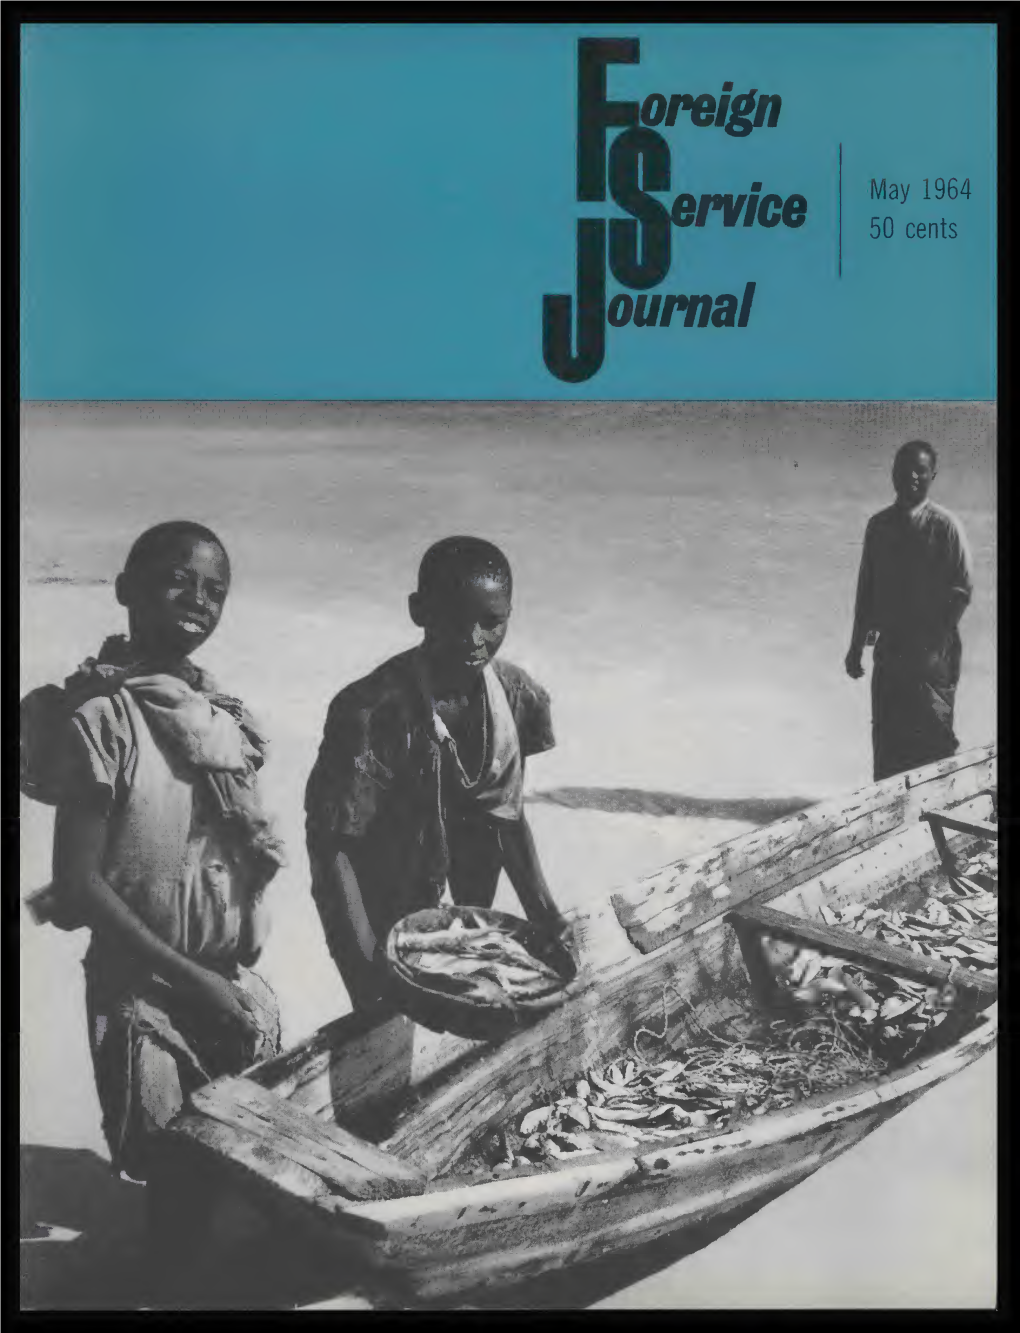 The Foreign Service Journal, May 1964